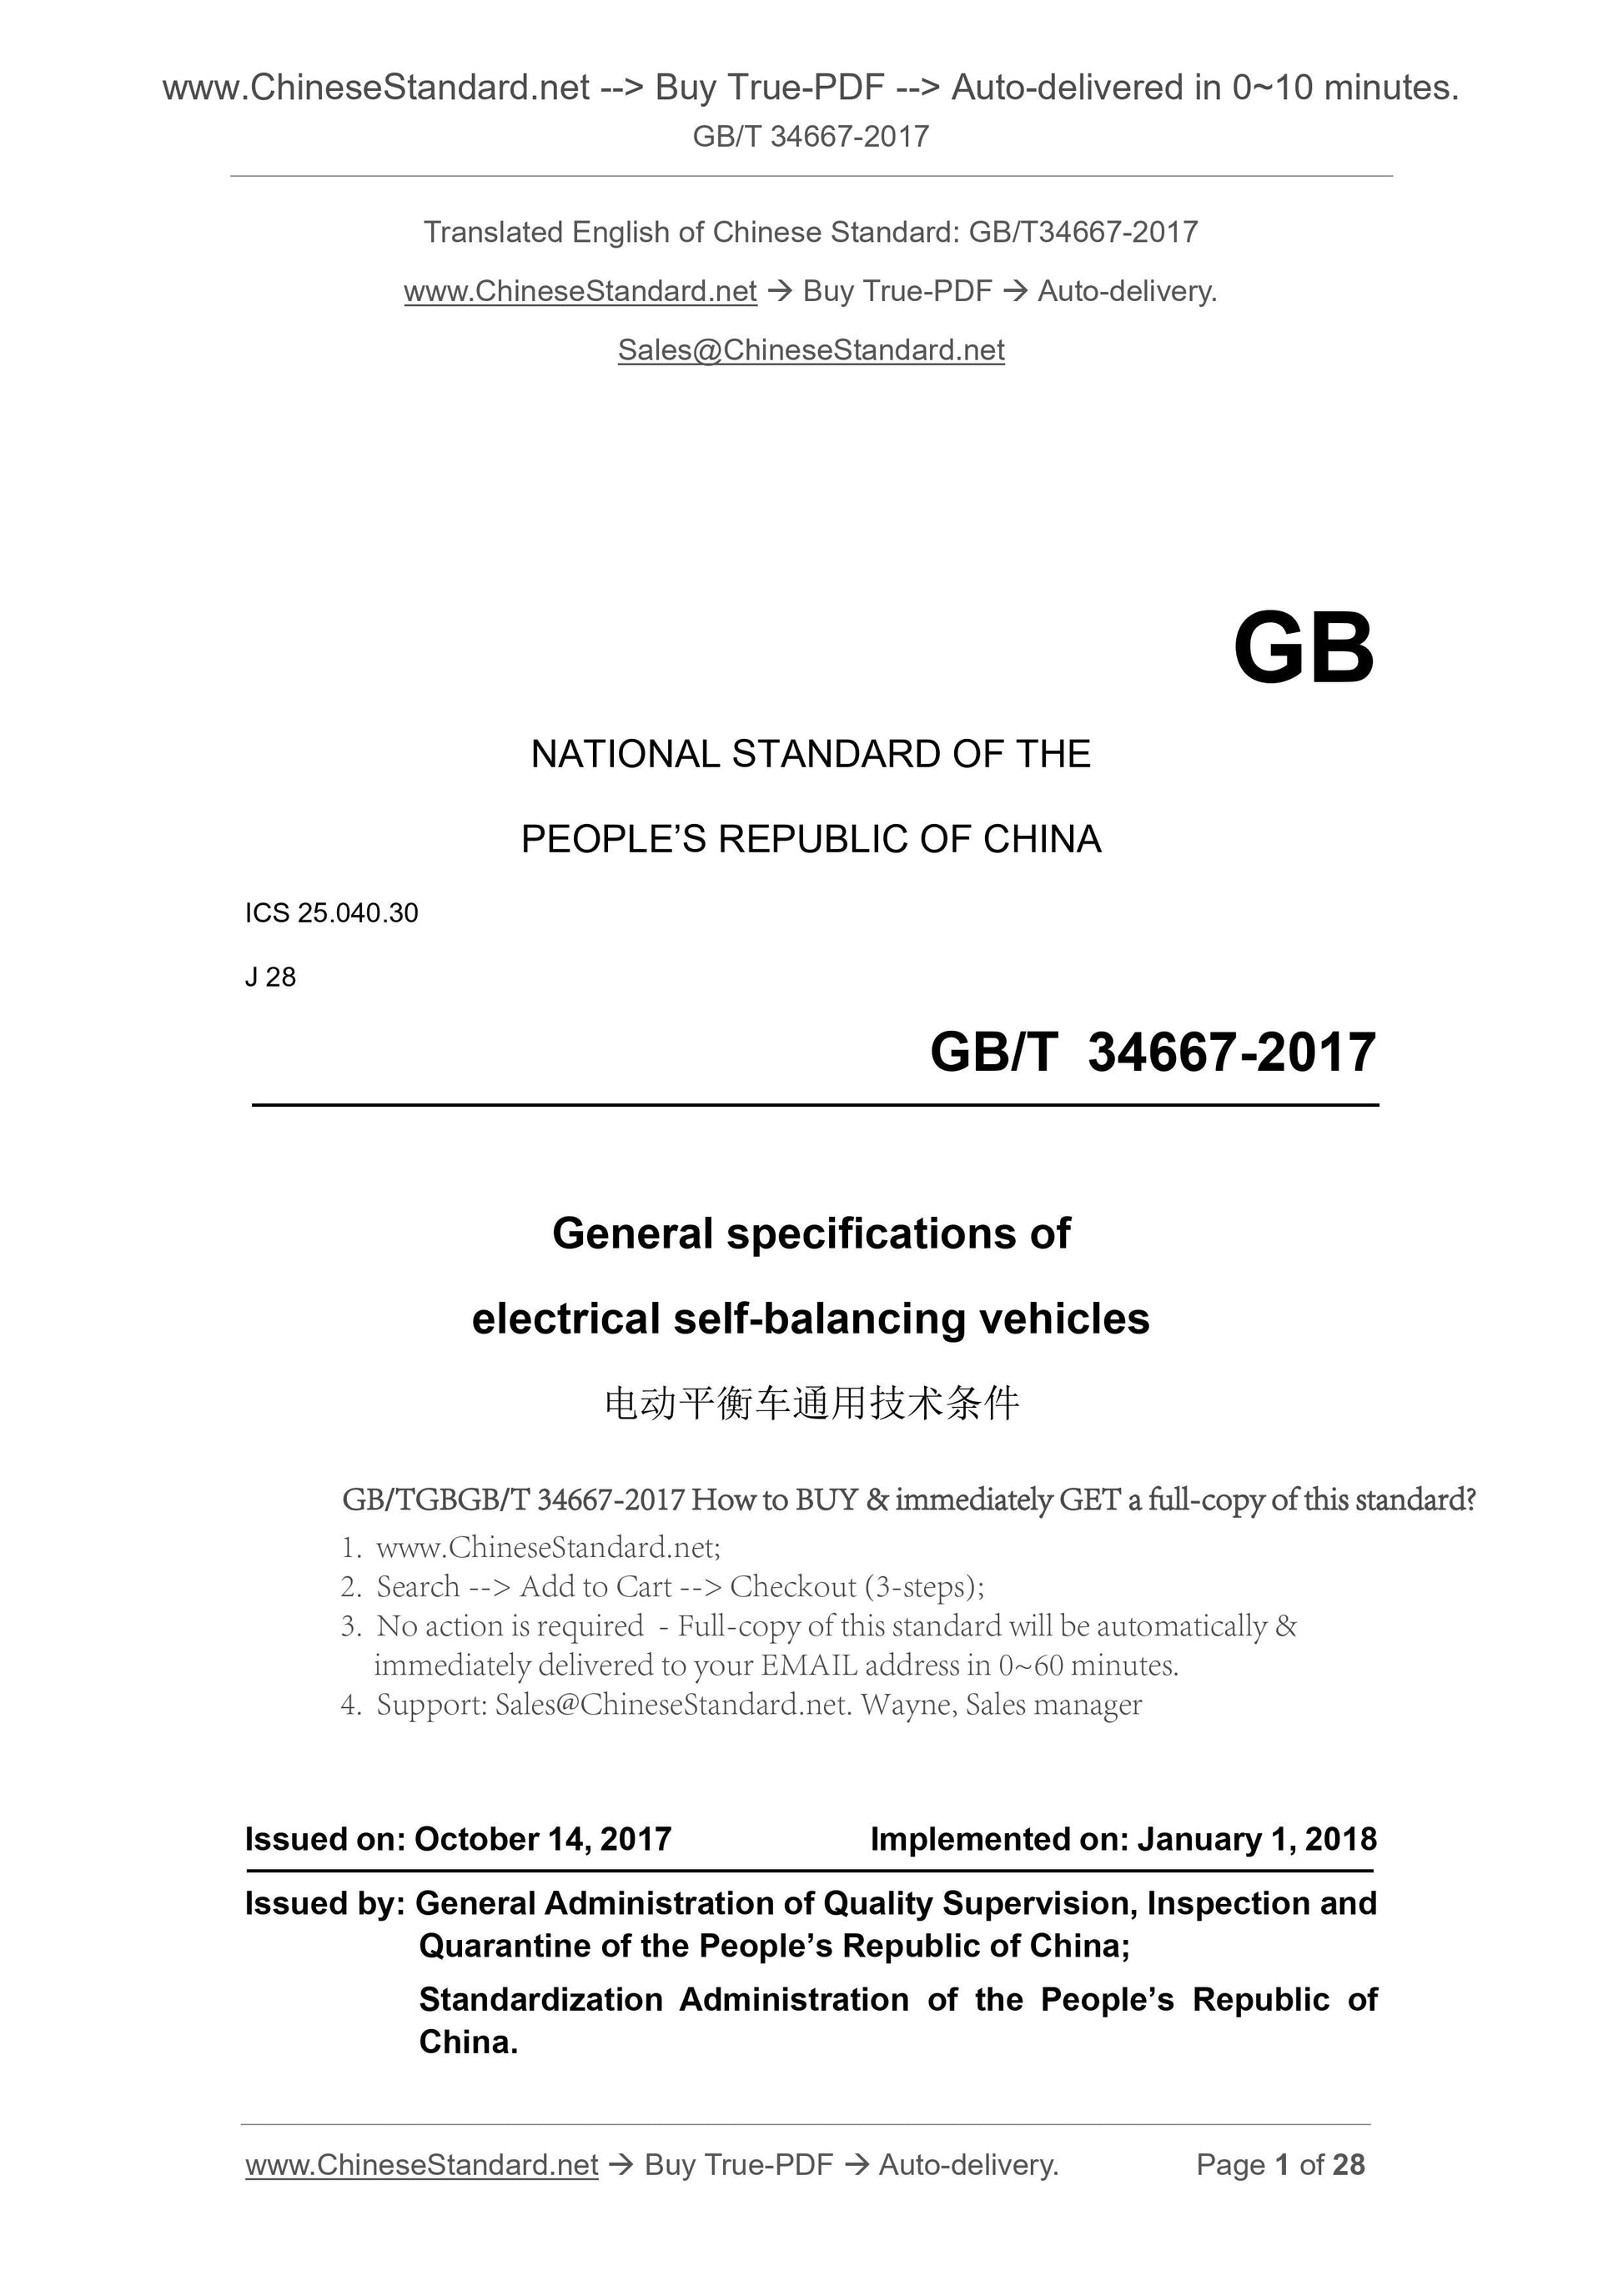 GB/T 34667-2017 Page 1